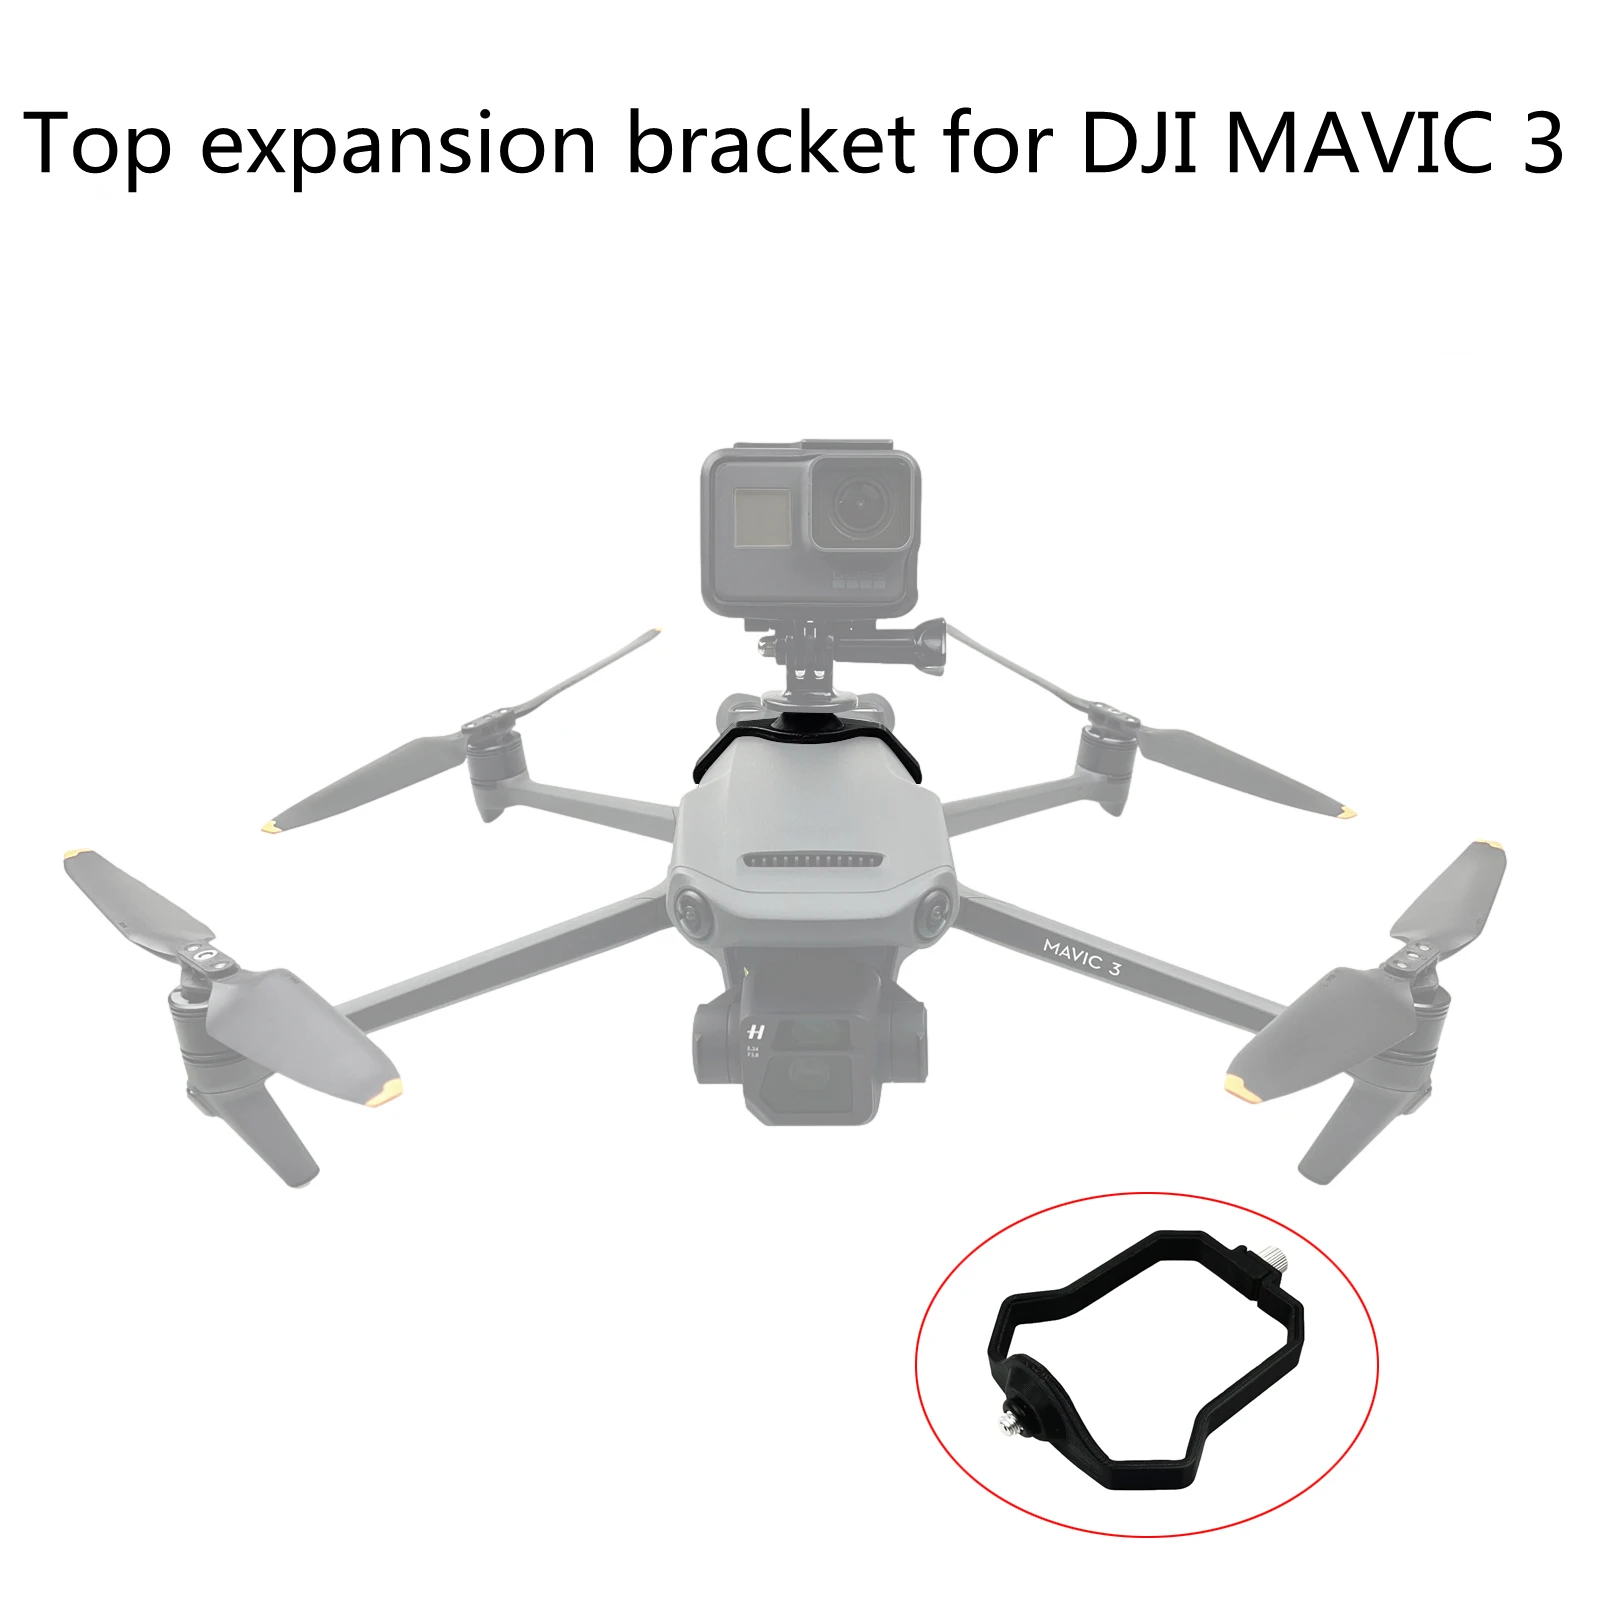 

Top Expansion Bracket To Gopro Panoramic Sports Camera Drone Accessories For DJI MAVIC 3